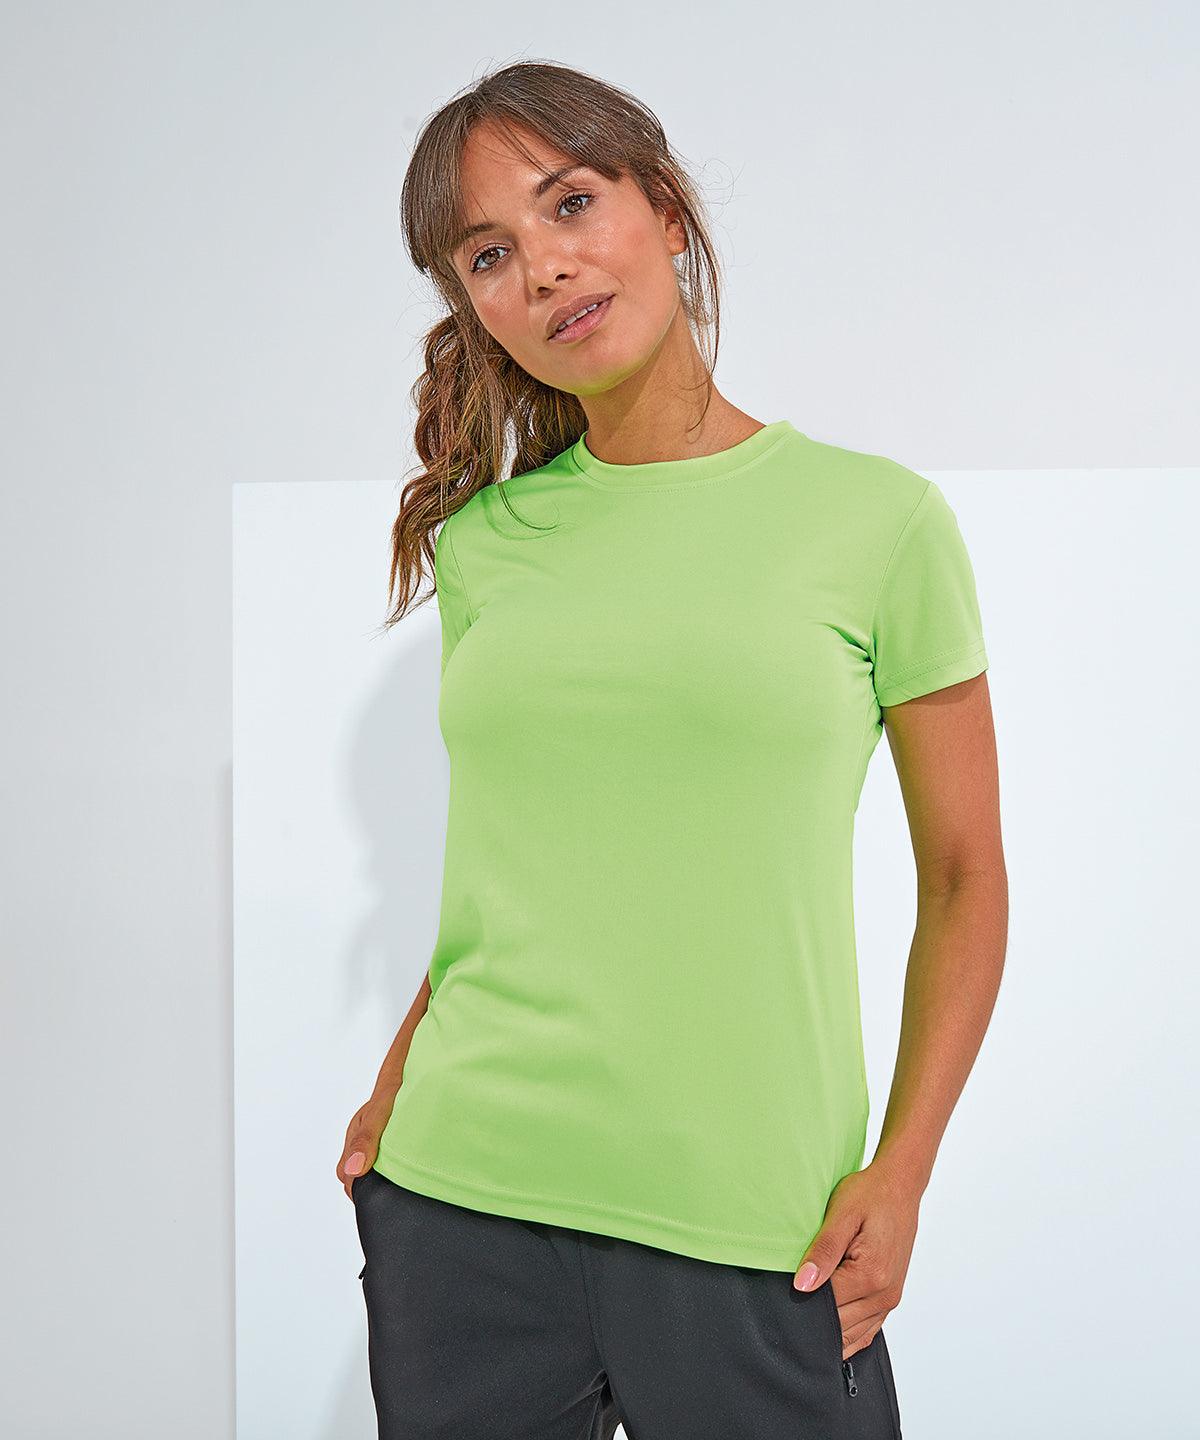 Black - Women's TriDri® recycled performance t-shirt T-Shirts TriDri® Activewear & Performance, Back to the Gym, Exclusives, New Styles For 2022, Organic & Conscious, Women's Fashion Schoolwear Centres